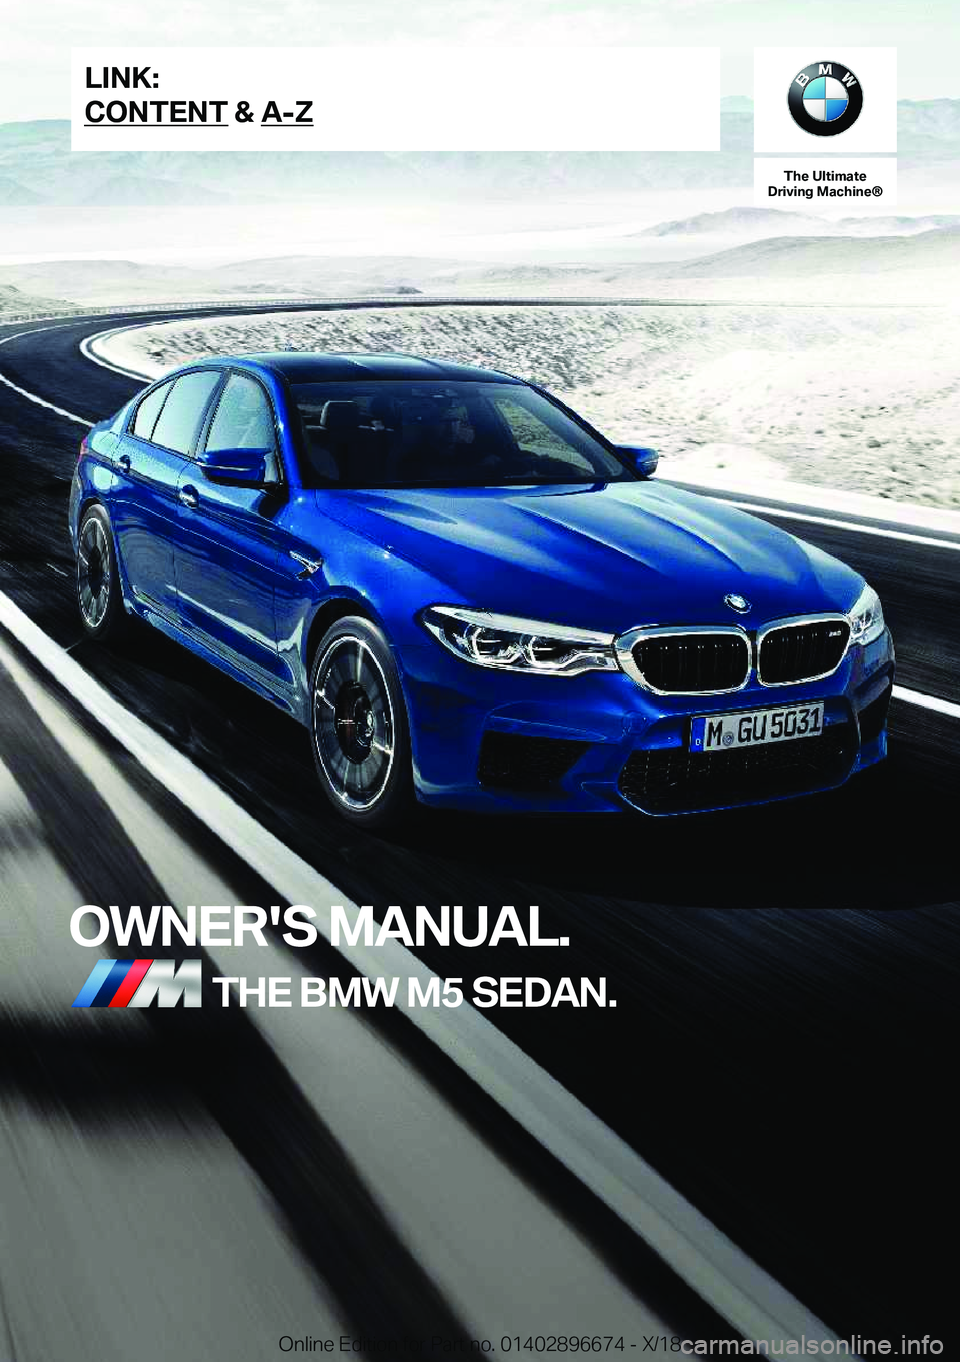 BMW M5 2019  Owners Manual �T�h�e��U�l�t�i�m�a�t�e
�D�r�i�v�i�n�g��M�a�c�h�i�n�e�n
�O�W�N�E�R�'�S��M�A�N�U�A�L�.�T�H�E��B�M�W��M�5��S�E�D�A�N�.�L�I�N�K�:
�C�O�N�T�E�N�T��&��A�-�Z�O�n�l�i�n�e��E�d�i�t�i�o�n��f�o�r�